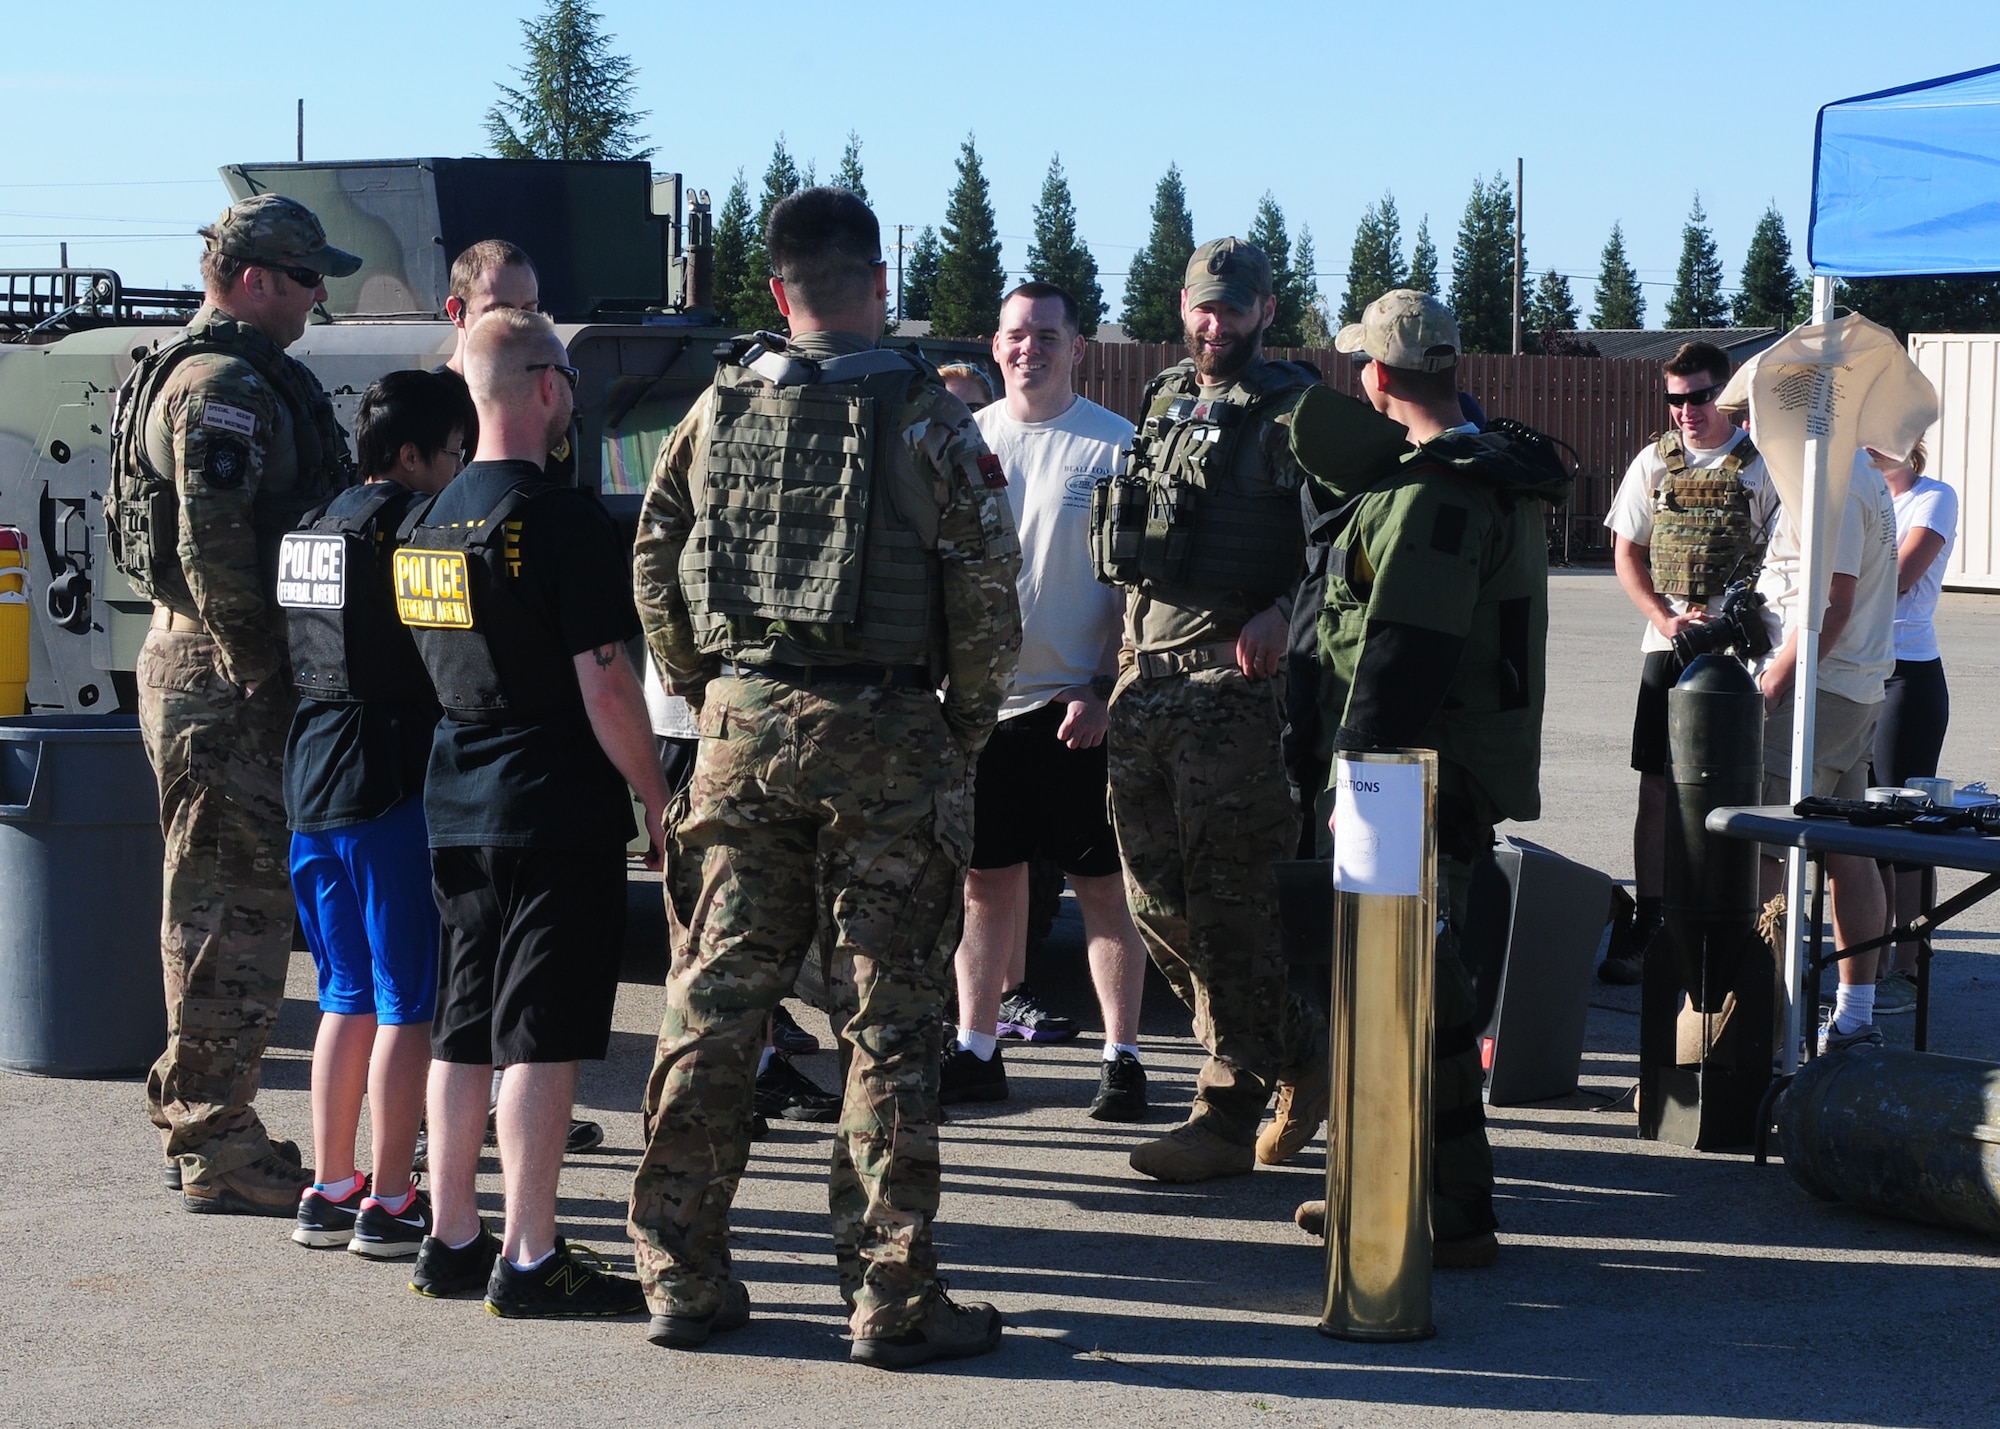 Members of Team Beale prepare for the Explosive Ordnance Disposal memorial run at Beale Air Force Base, Calif., May 22, 2013. The run honored fallen EOD warriors and recognized the loss of Capt. Reid Nishizuka, Staff Sgt. Richard Dickson, Capt. Brandon Cyr and Staff Sgt.  Daniel Fannin. (U.S. Air Force photo by Senior Airman Allen Pollard/Released)